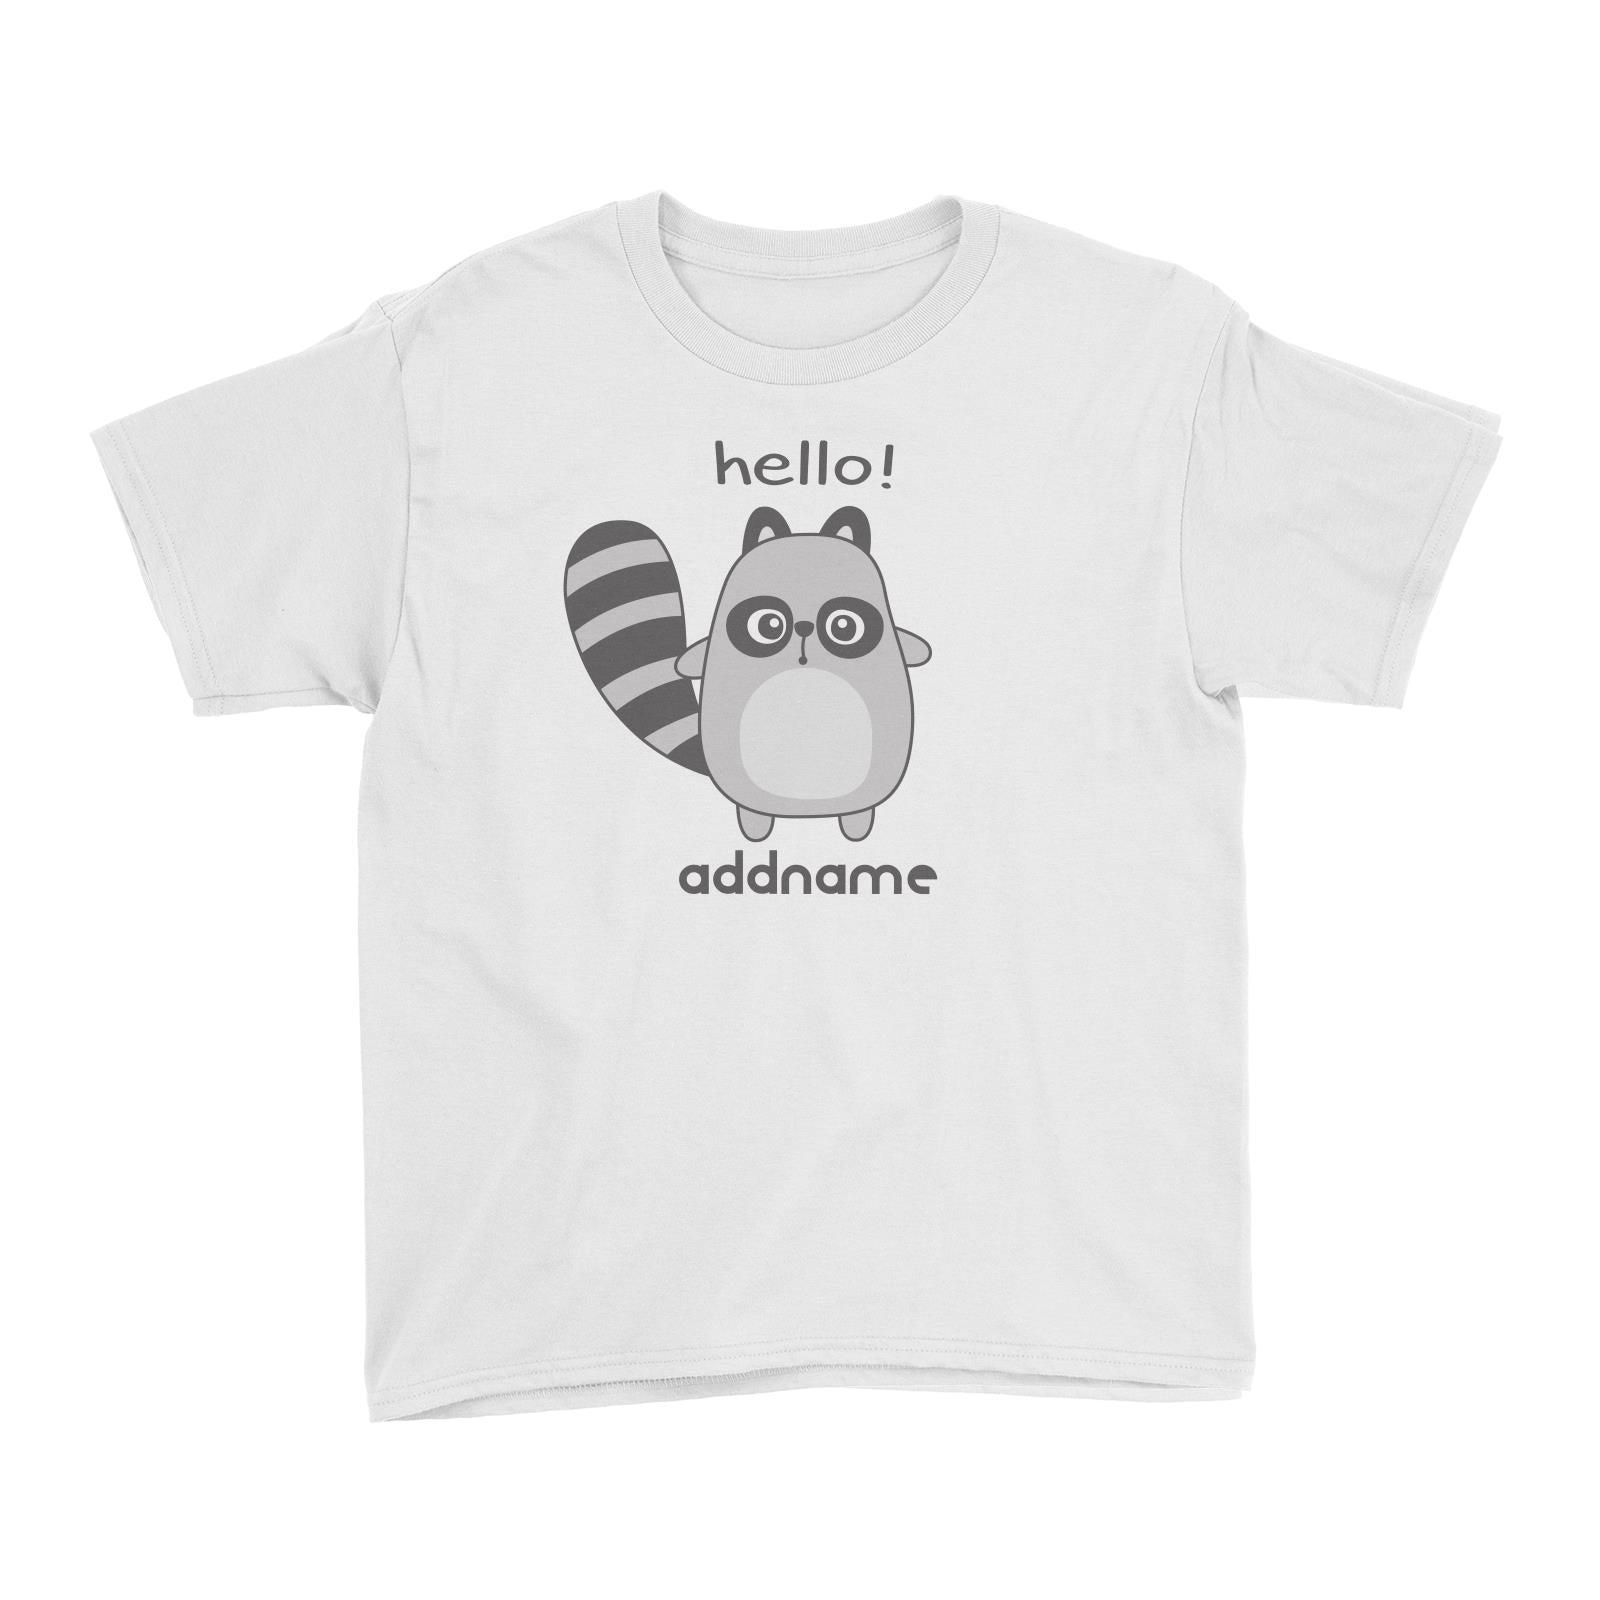 Cool Cute Animals Racoon Hello Addname Kid's T-Shirts